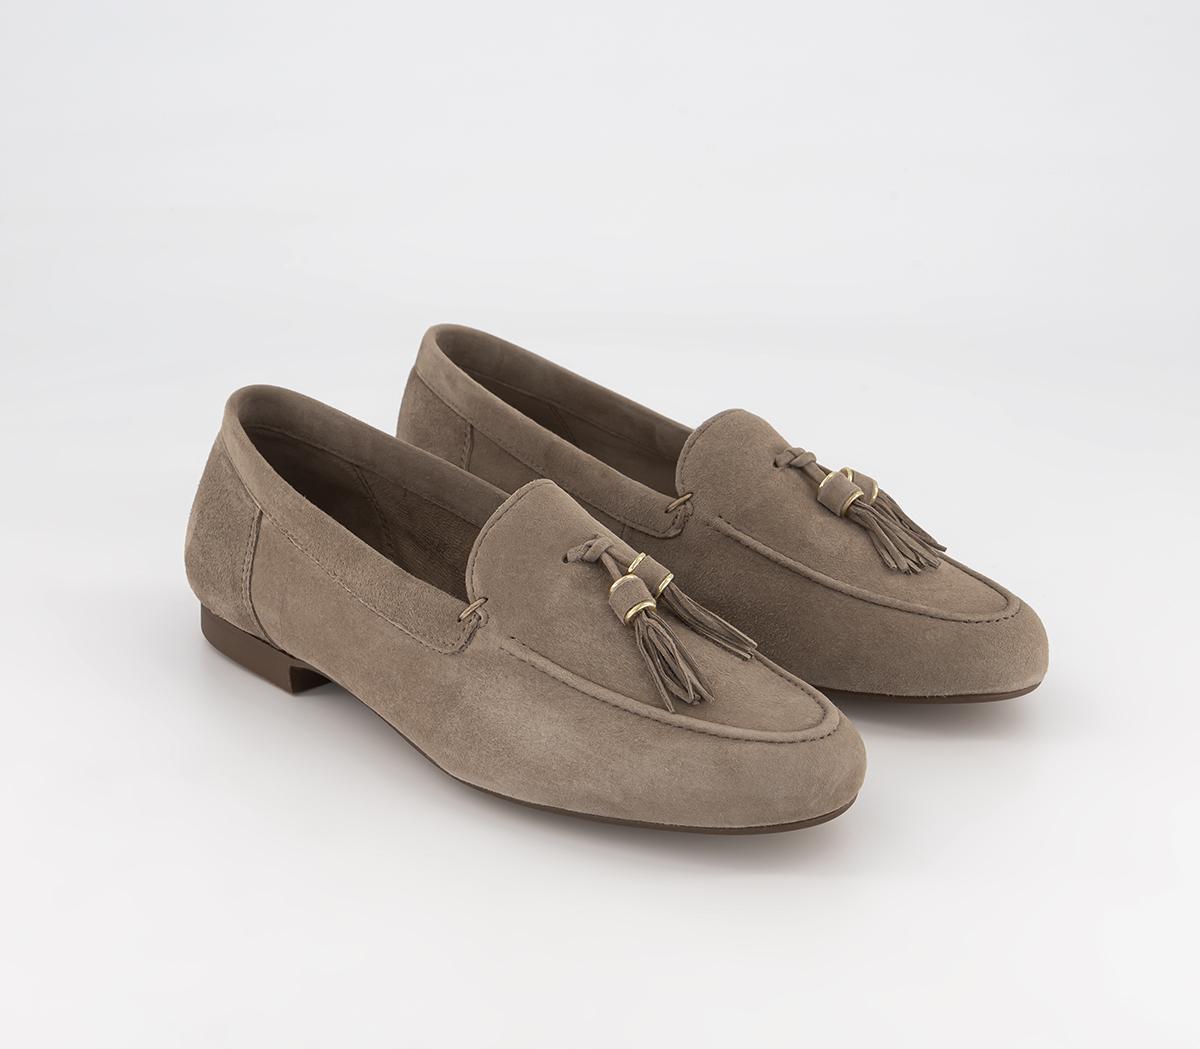 OFFICE Wide Fit Flick Retro Tassel Loafers Taupe Suede - Women’s Loafers